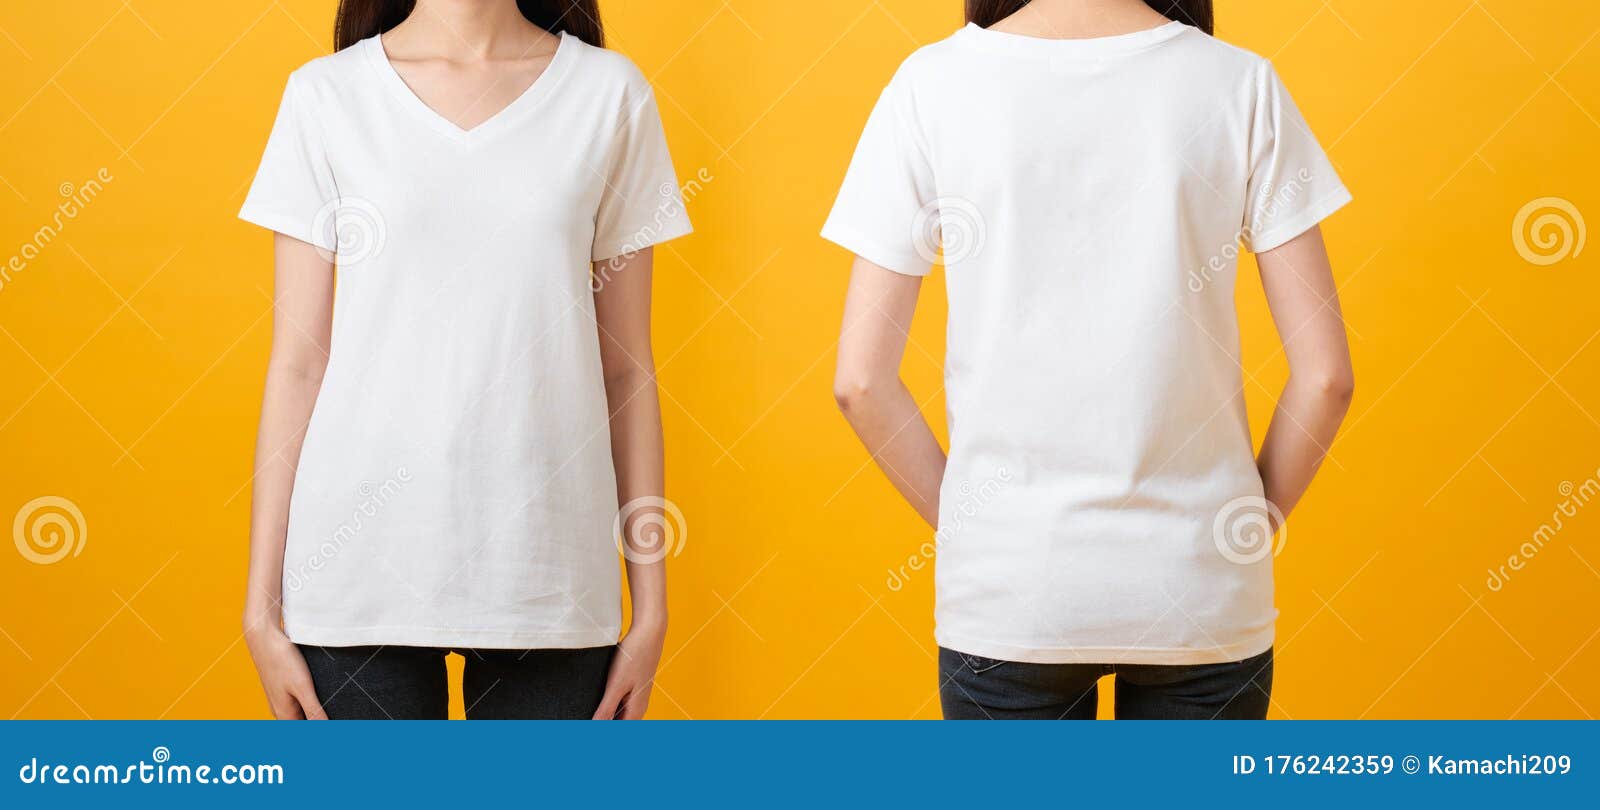 Download Young Woman In Blank White T-shirt Isolated On Yellow ...